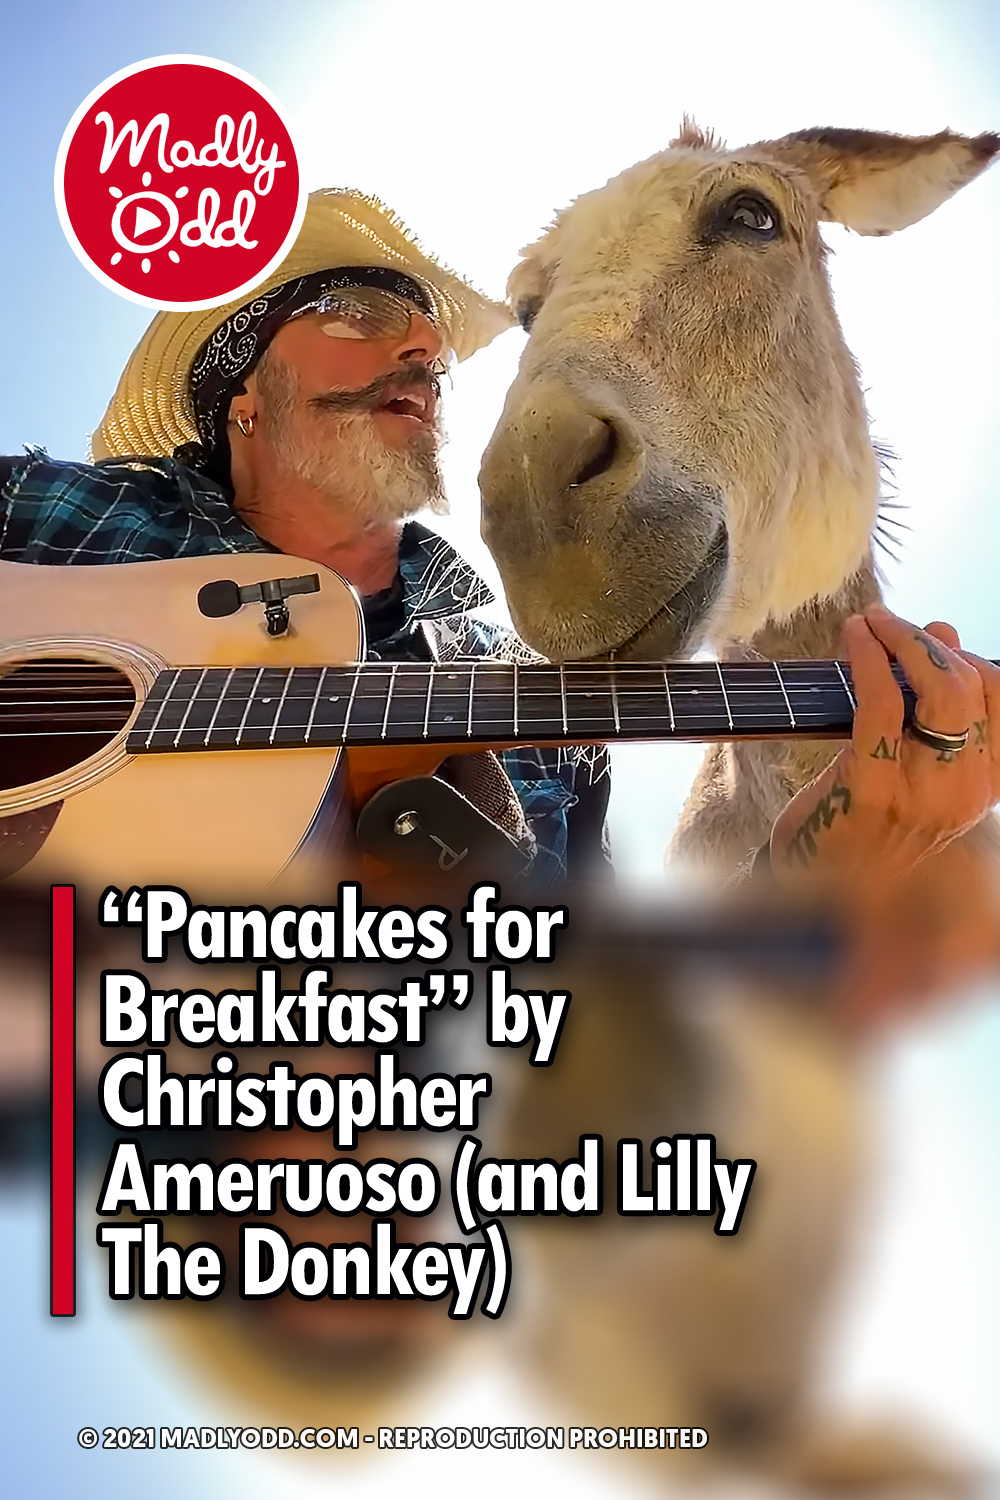 “Pancakes for Breakfast” by Christopher Ameruoso (and Lilly The Donkey)